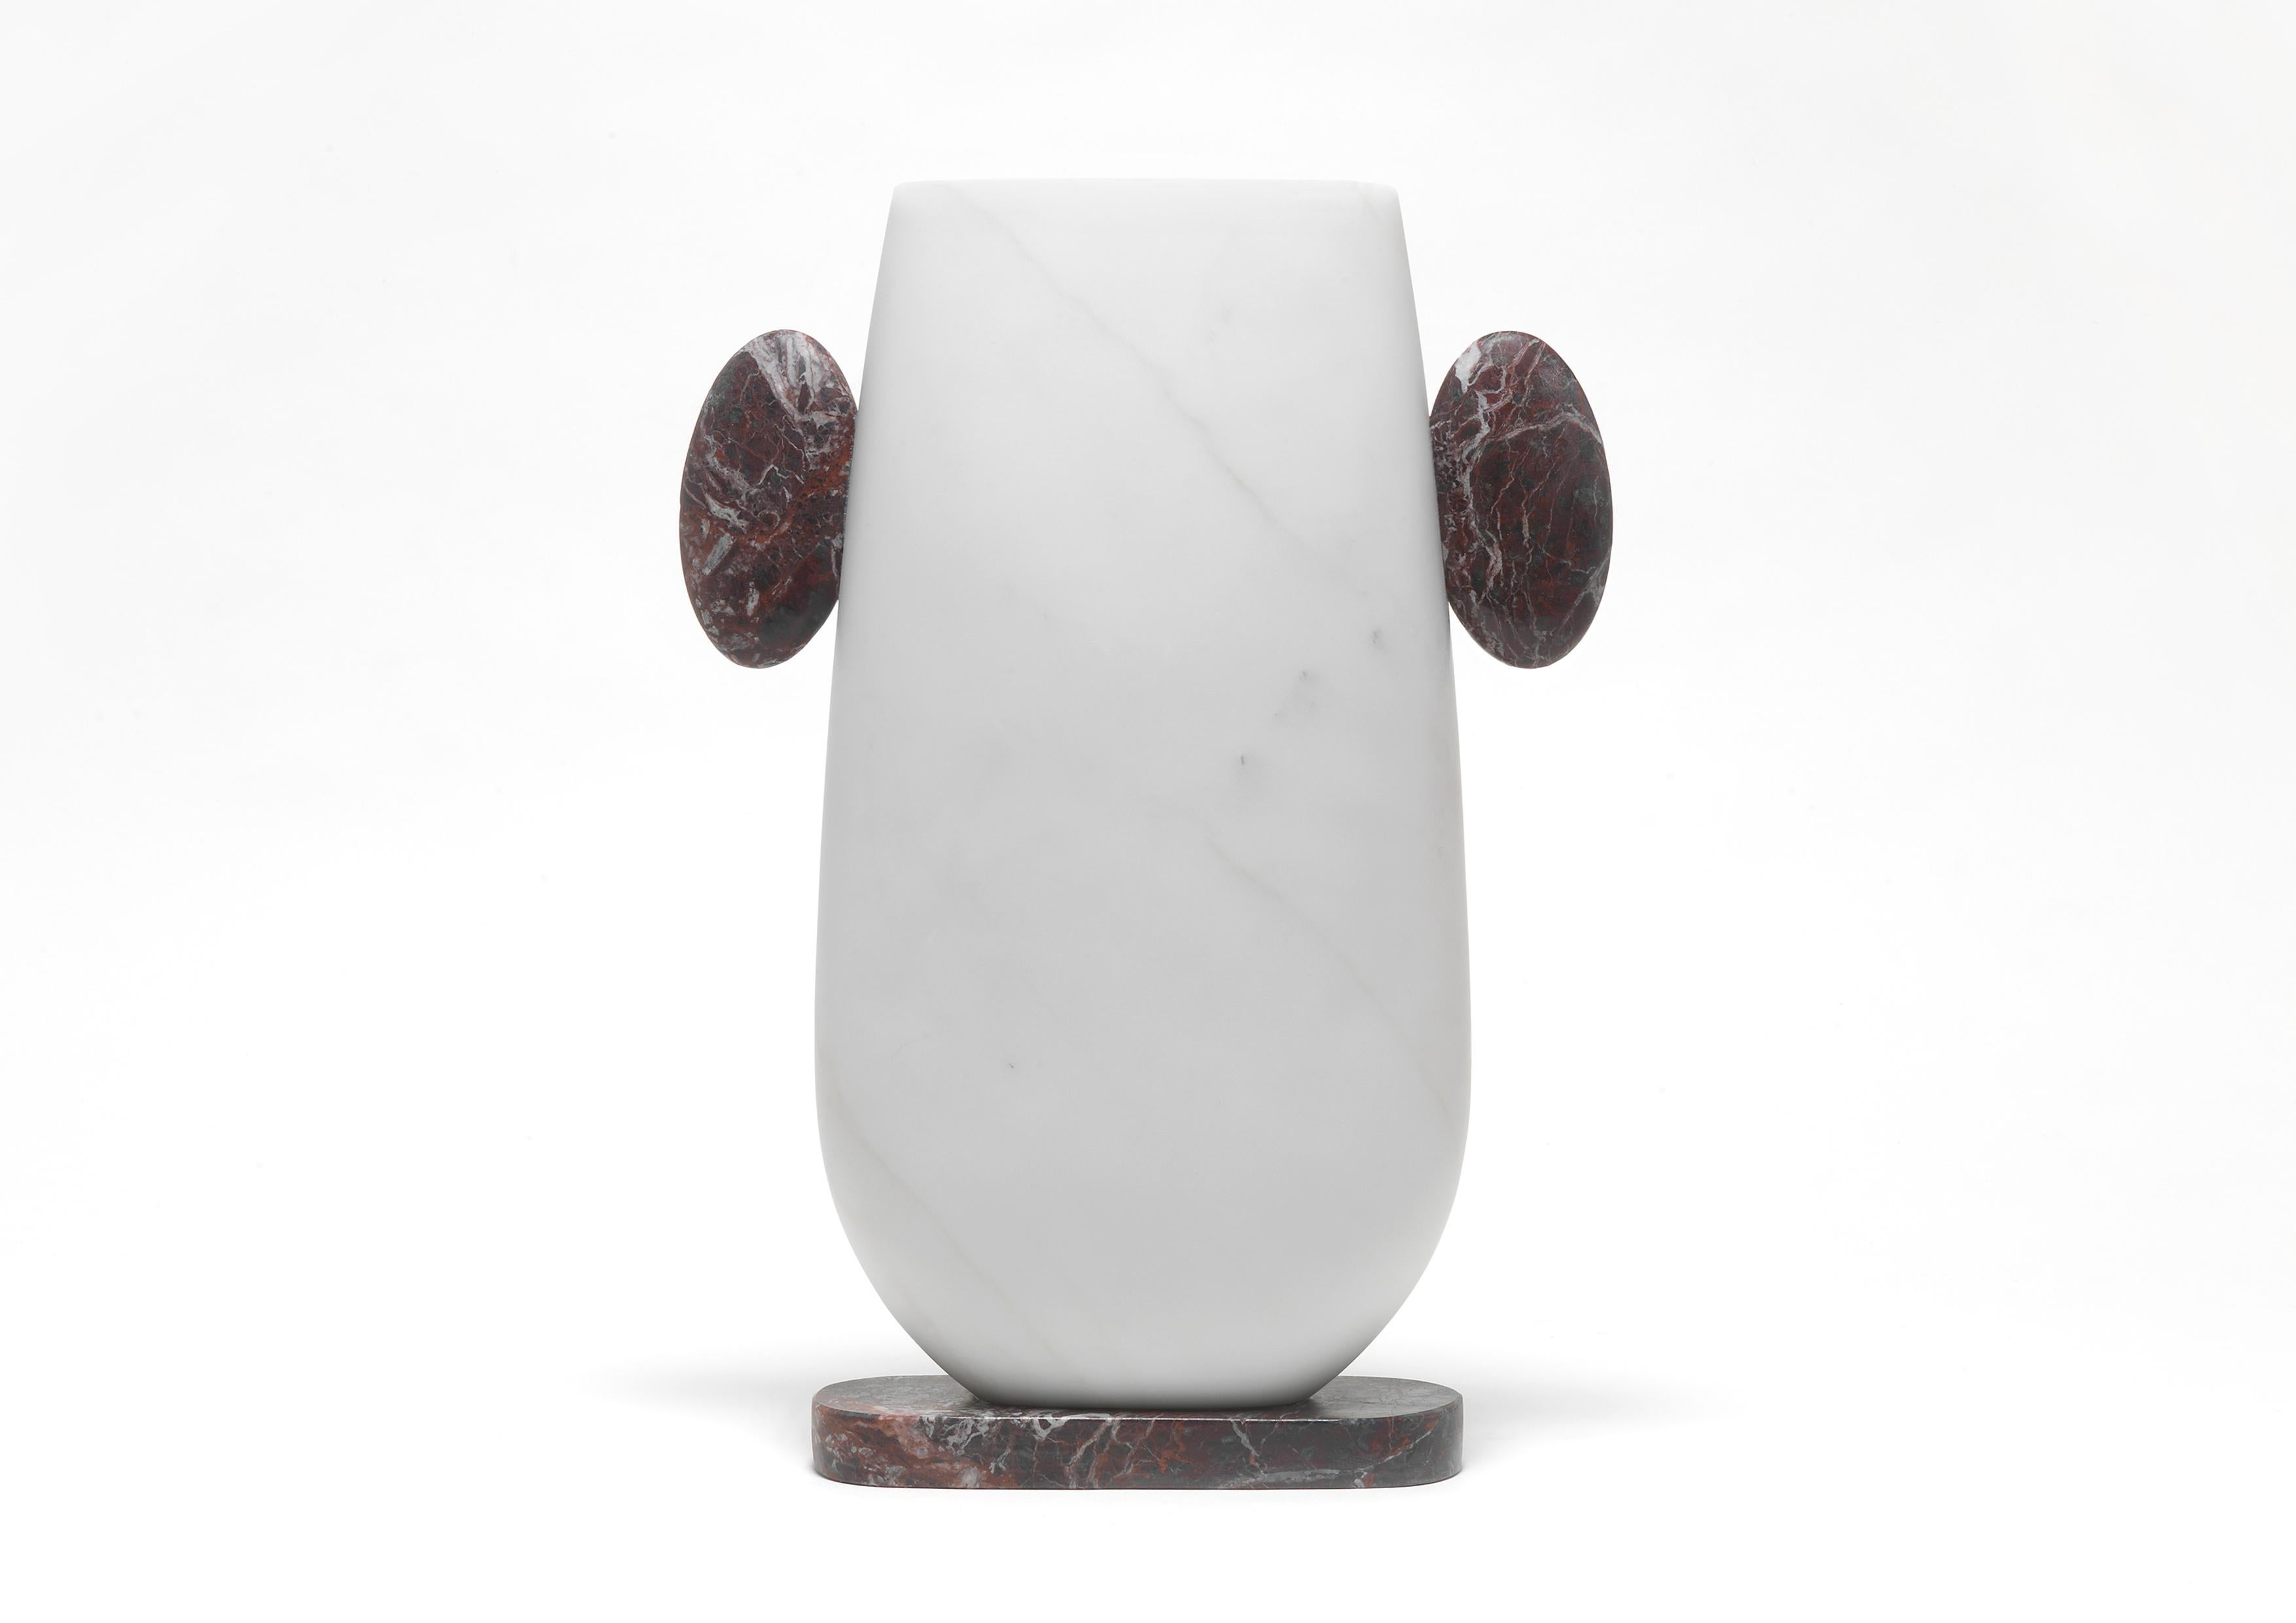 Pietro marble vase by Matteo Cibic
Dimensions: 10.7 x 2.9 x 15.1 cm
Materials: 
Bianco
Michelangelo,
Rosso Levanto

Vases made of various marbles cannot guarantee watertightness, better not use for cut flowers unless with the use vials for